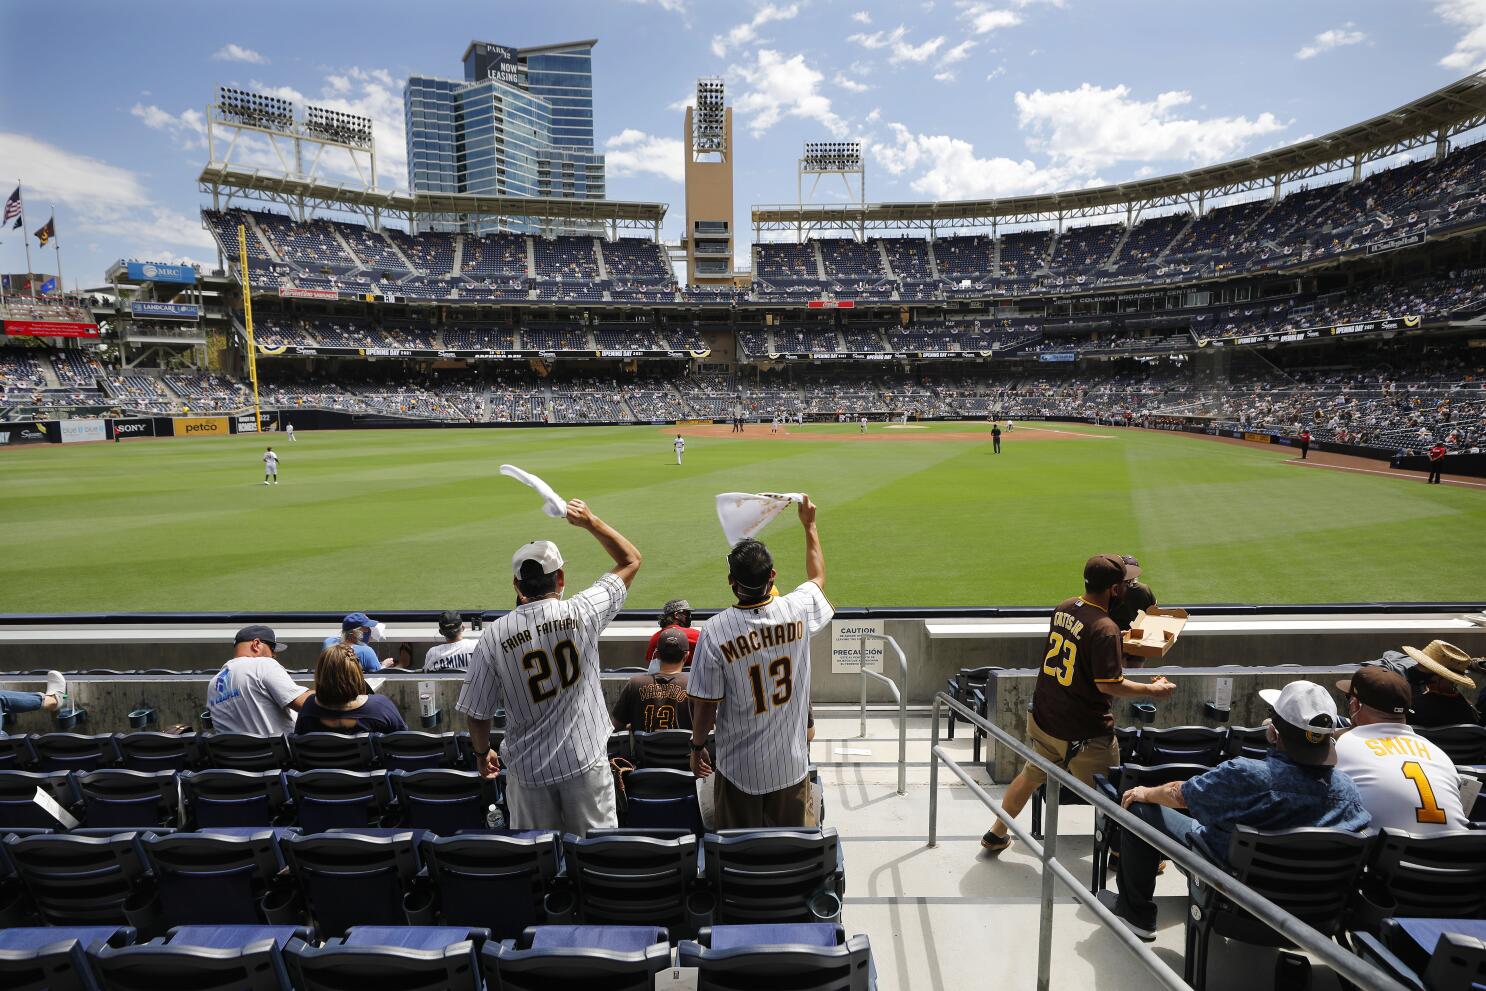 Padres to increase Petco Park capacity, open concession stands for